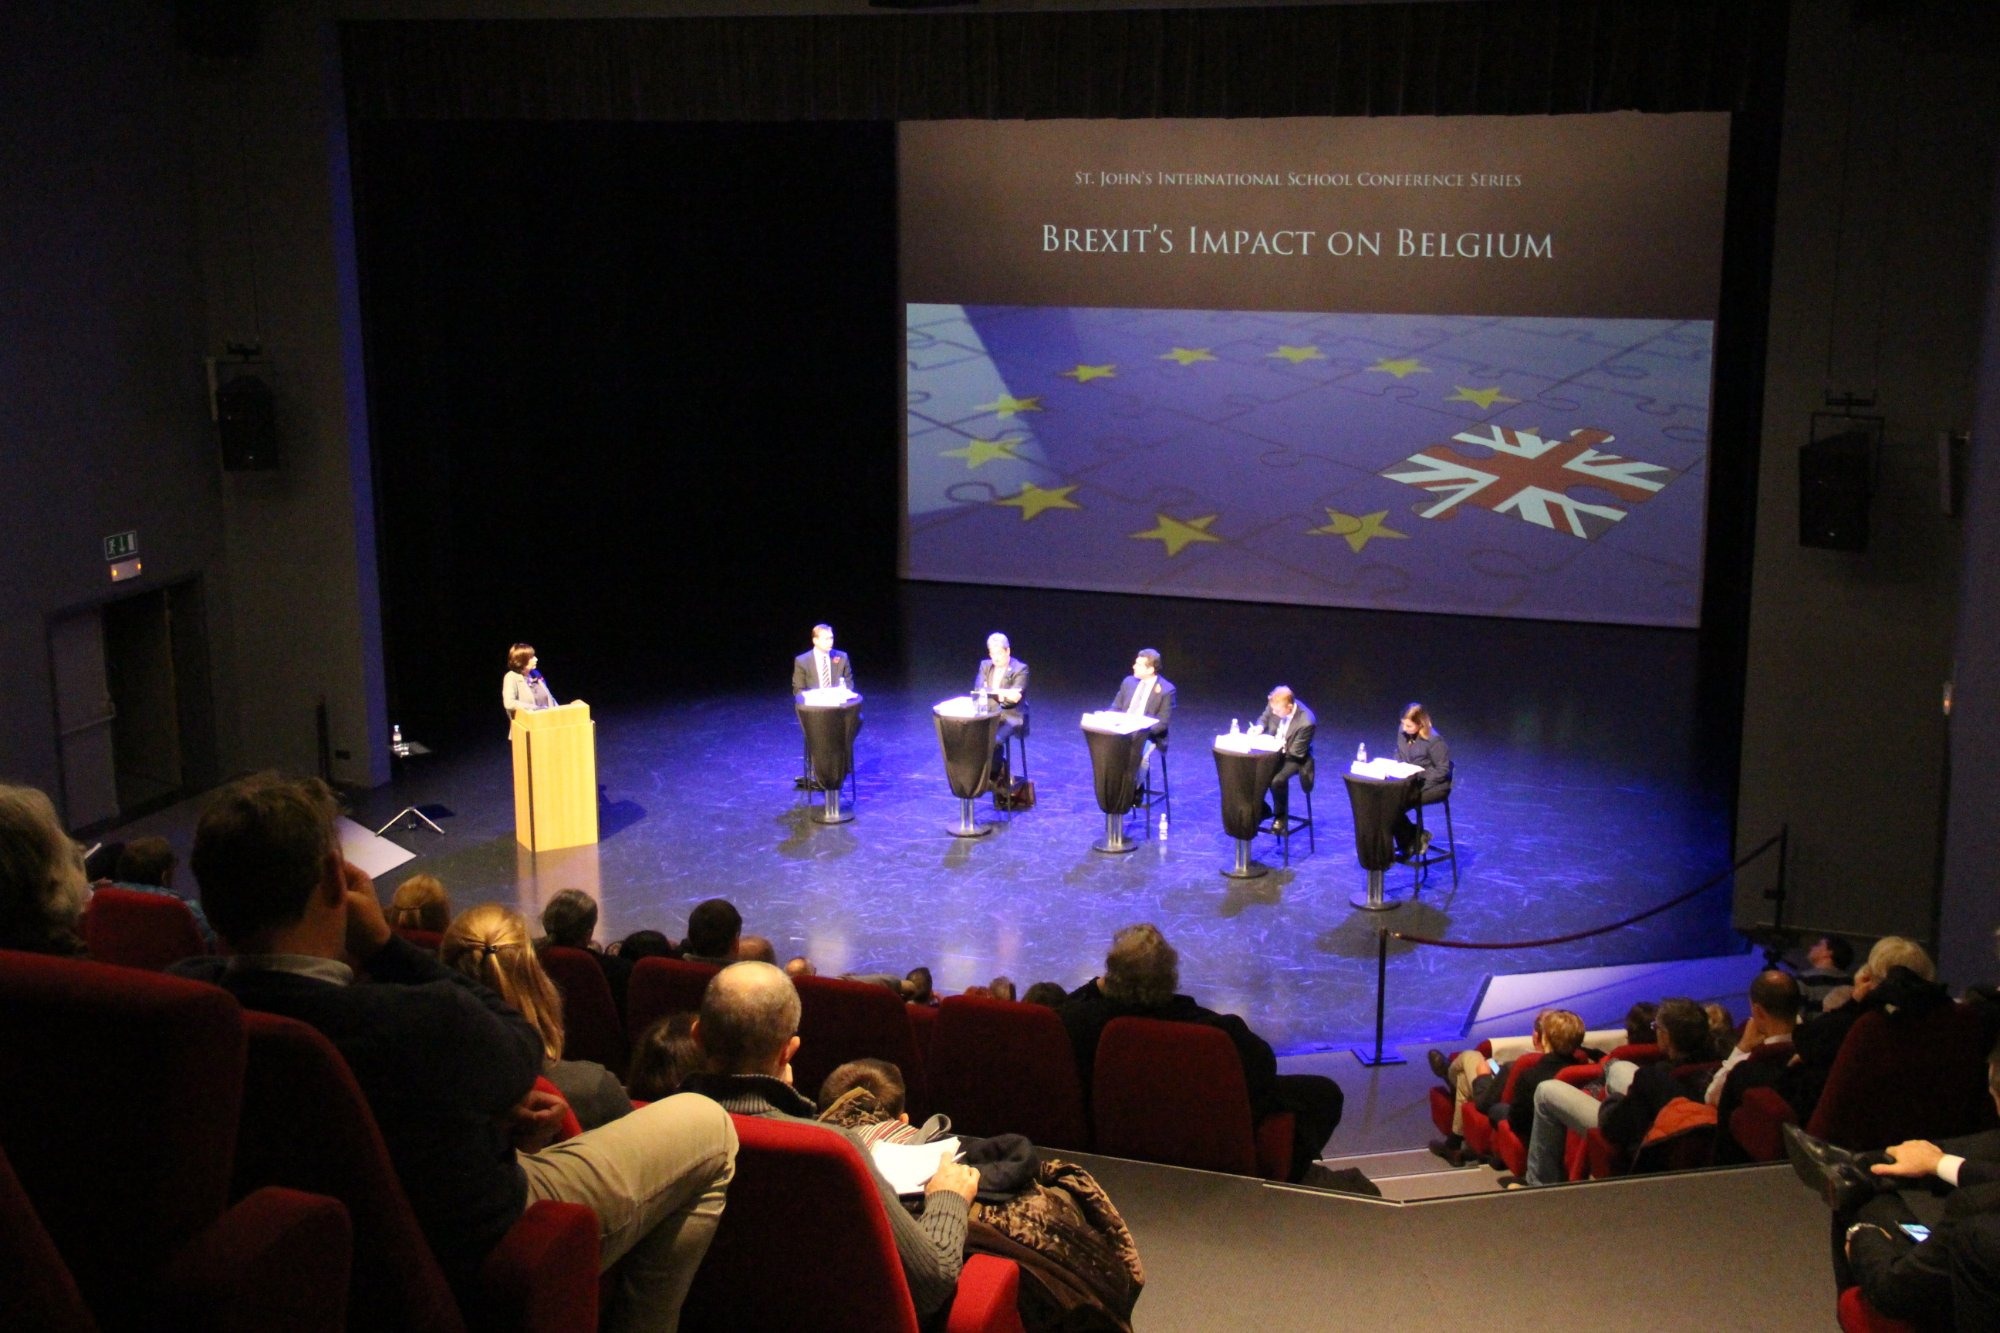 Five things we learned from "Brexit's Impact on Belgium" panel